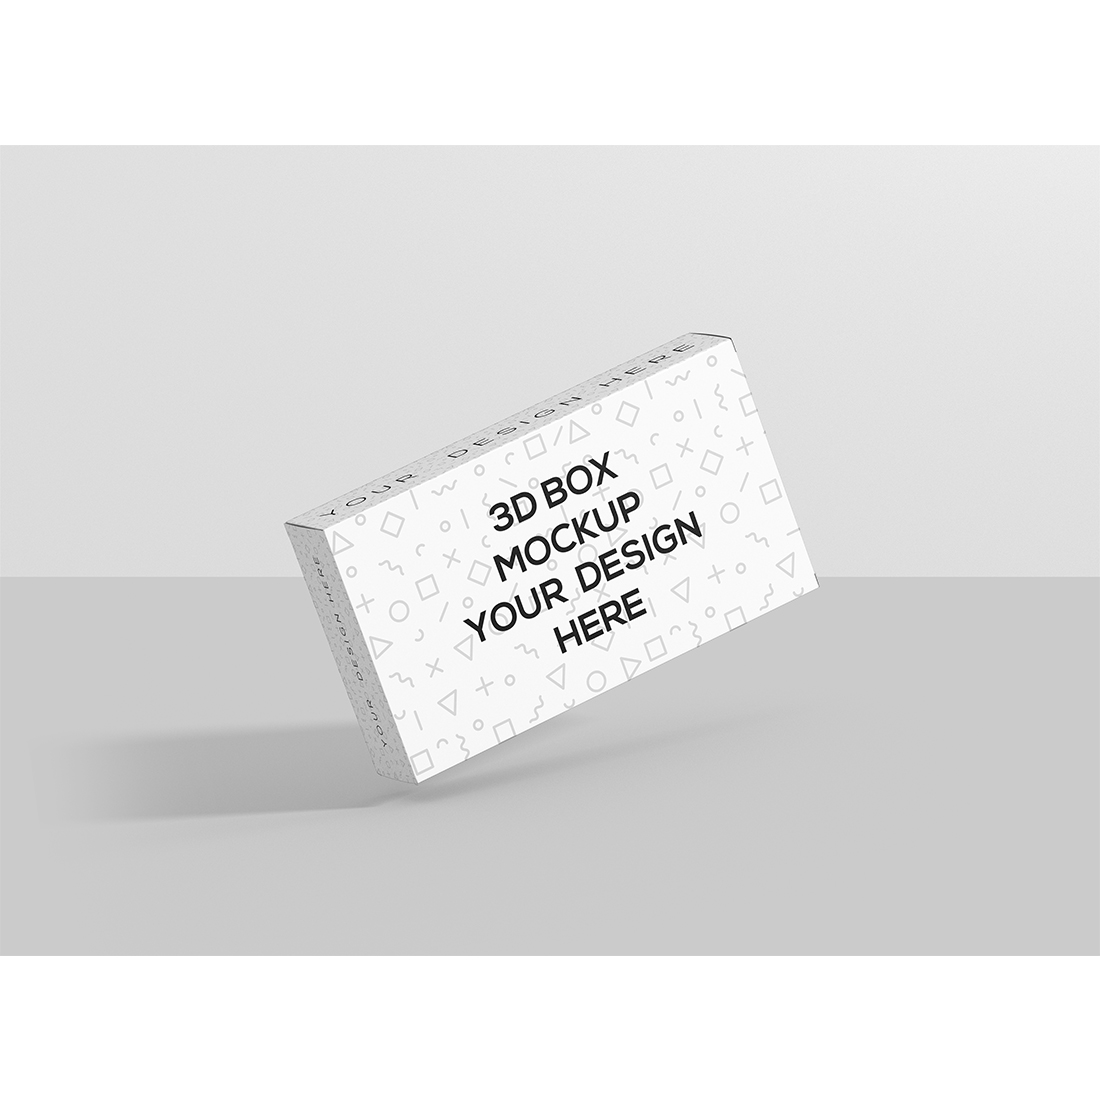 Wide Flat Rectangle Box Mockup cover image.